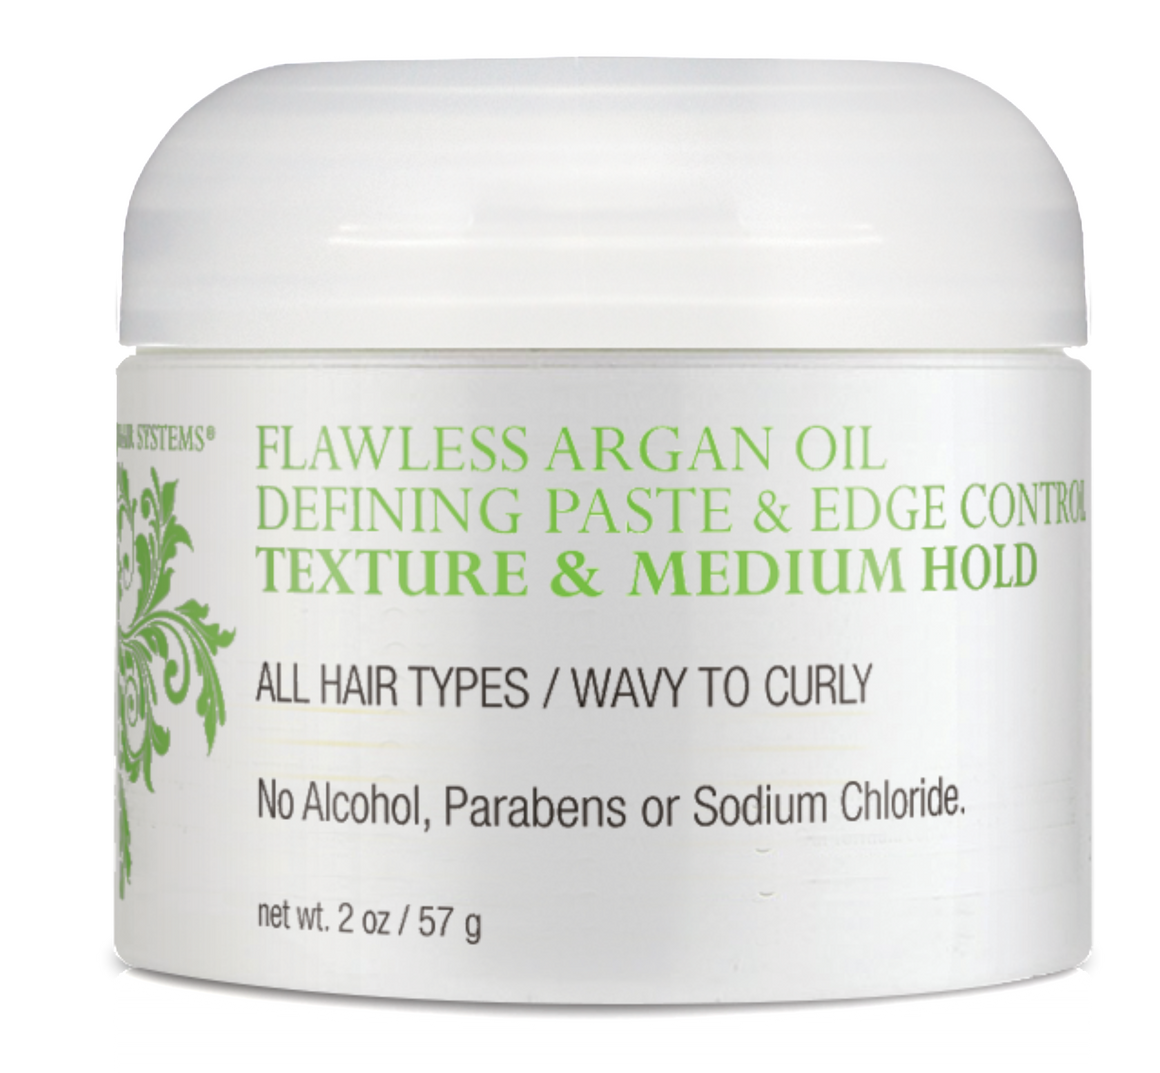 FLAWLESS Argan Oil Defining Paste & Edge Control for Natural Hair to nourish your hair and create flawless styles with a touchable, semi-matte finish.